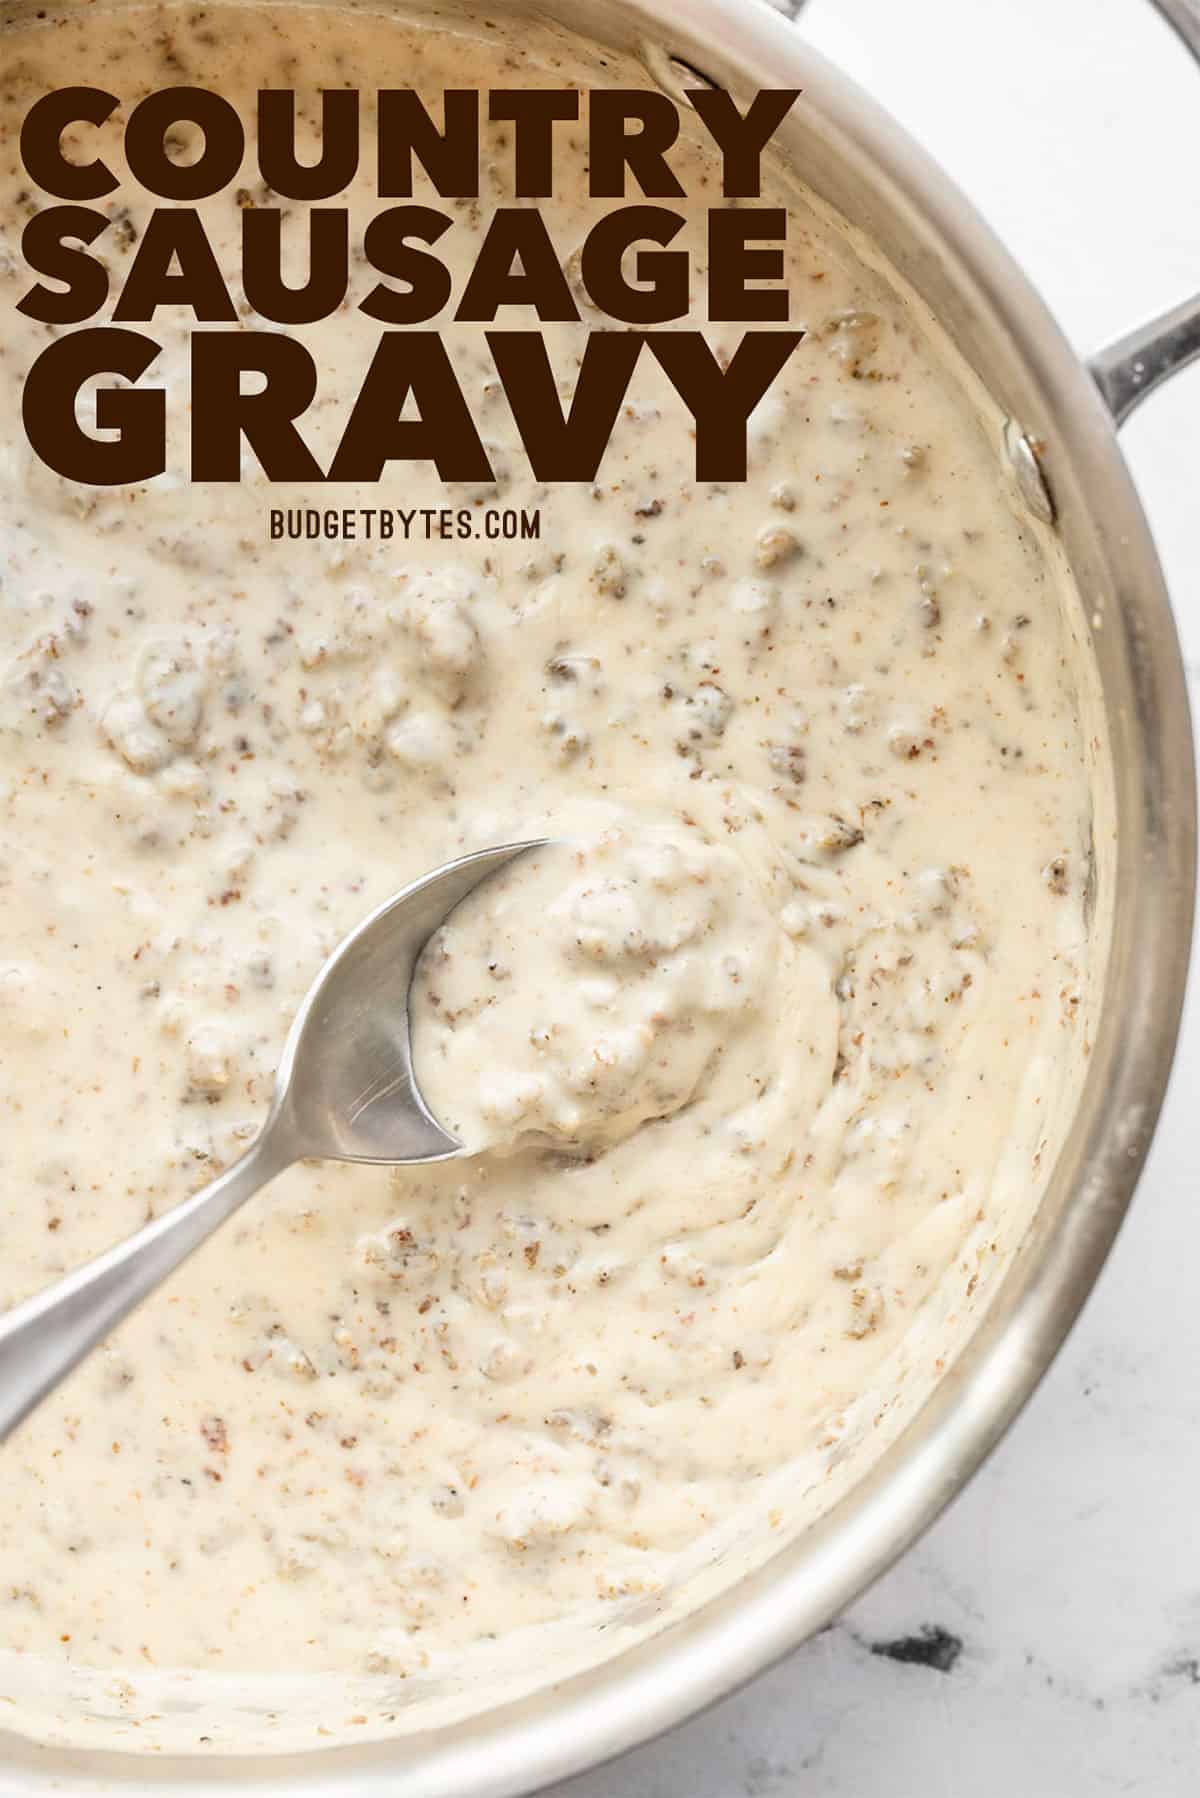 Easy Country Sausage Gravy - Budget Bytes